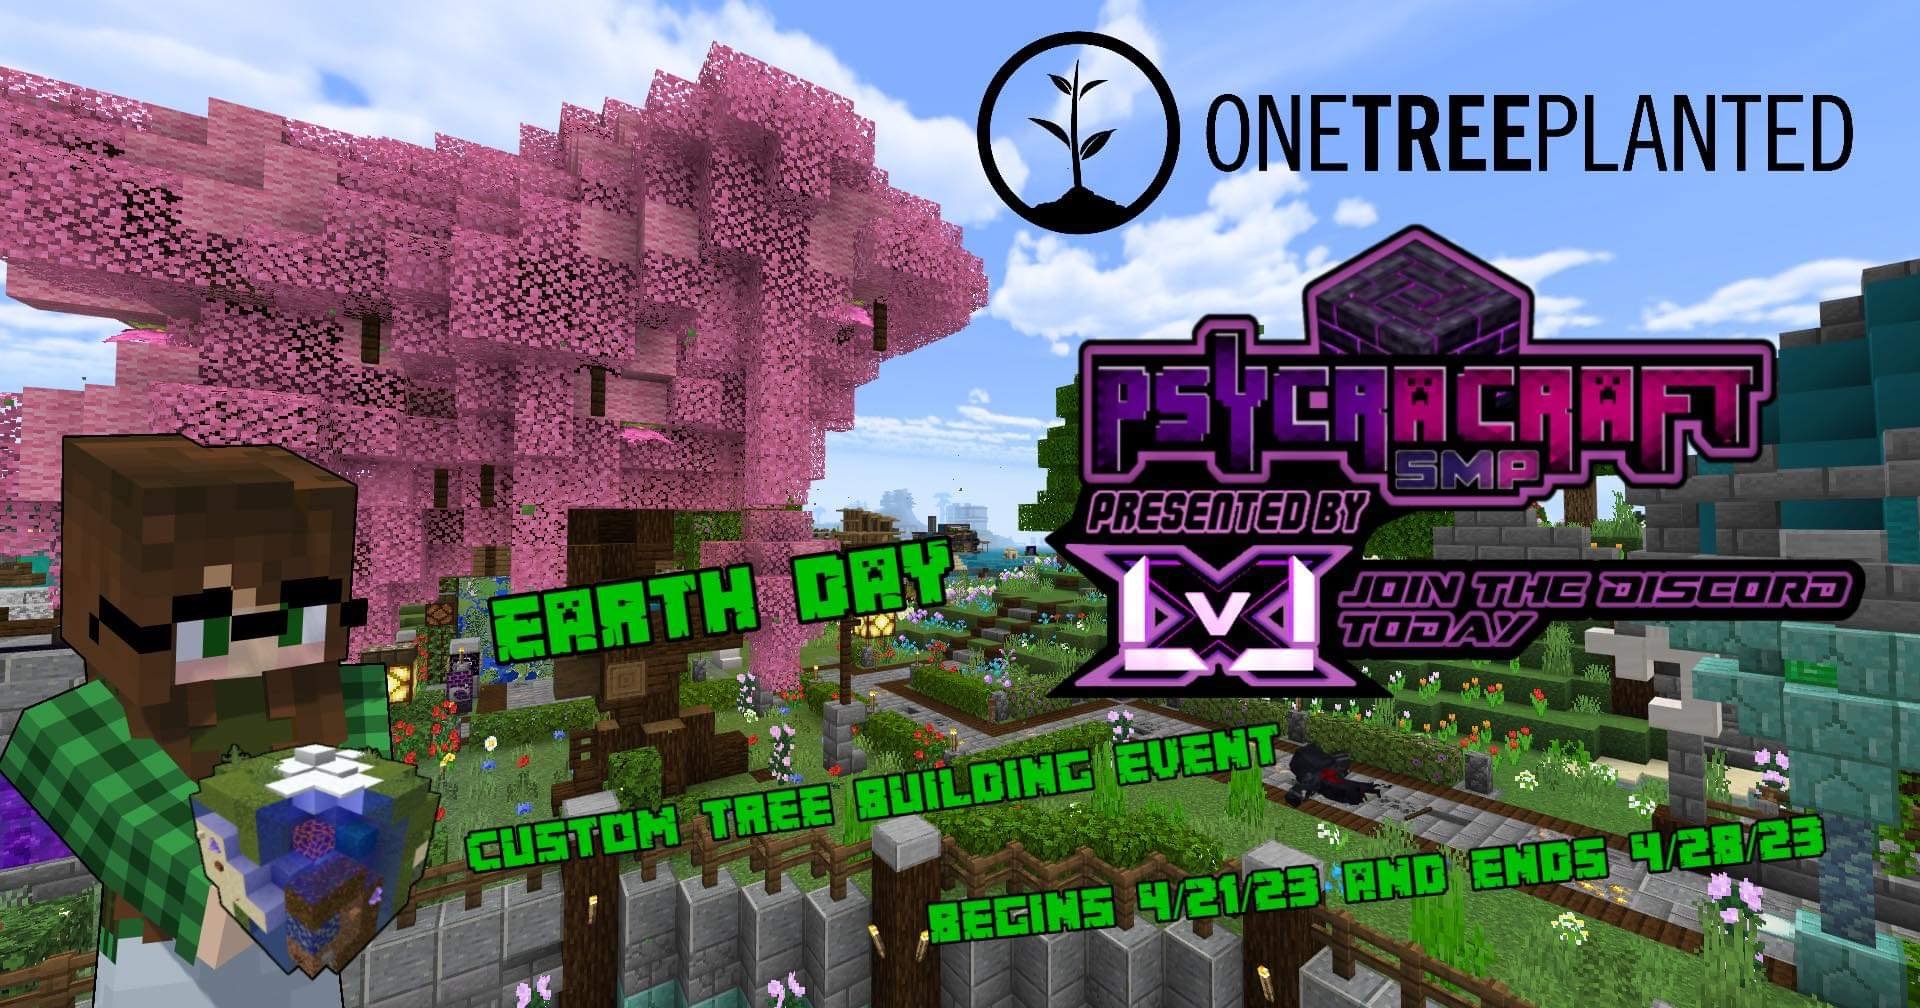 Minecraft Earth server, come play #minecraft #gaming